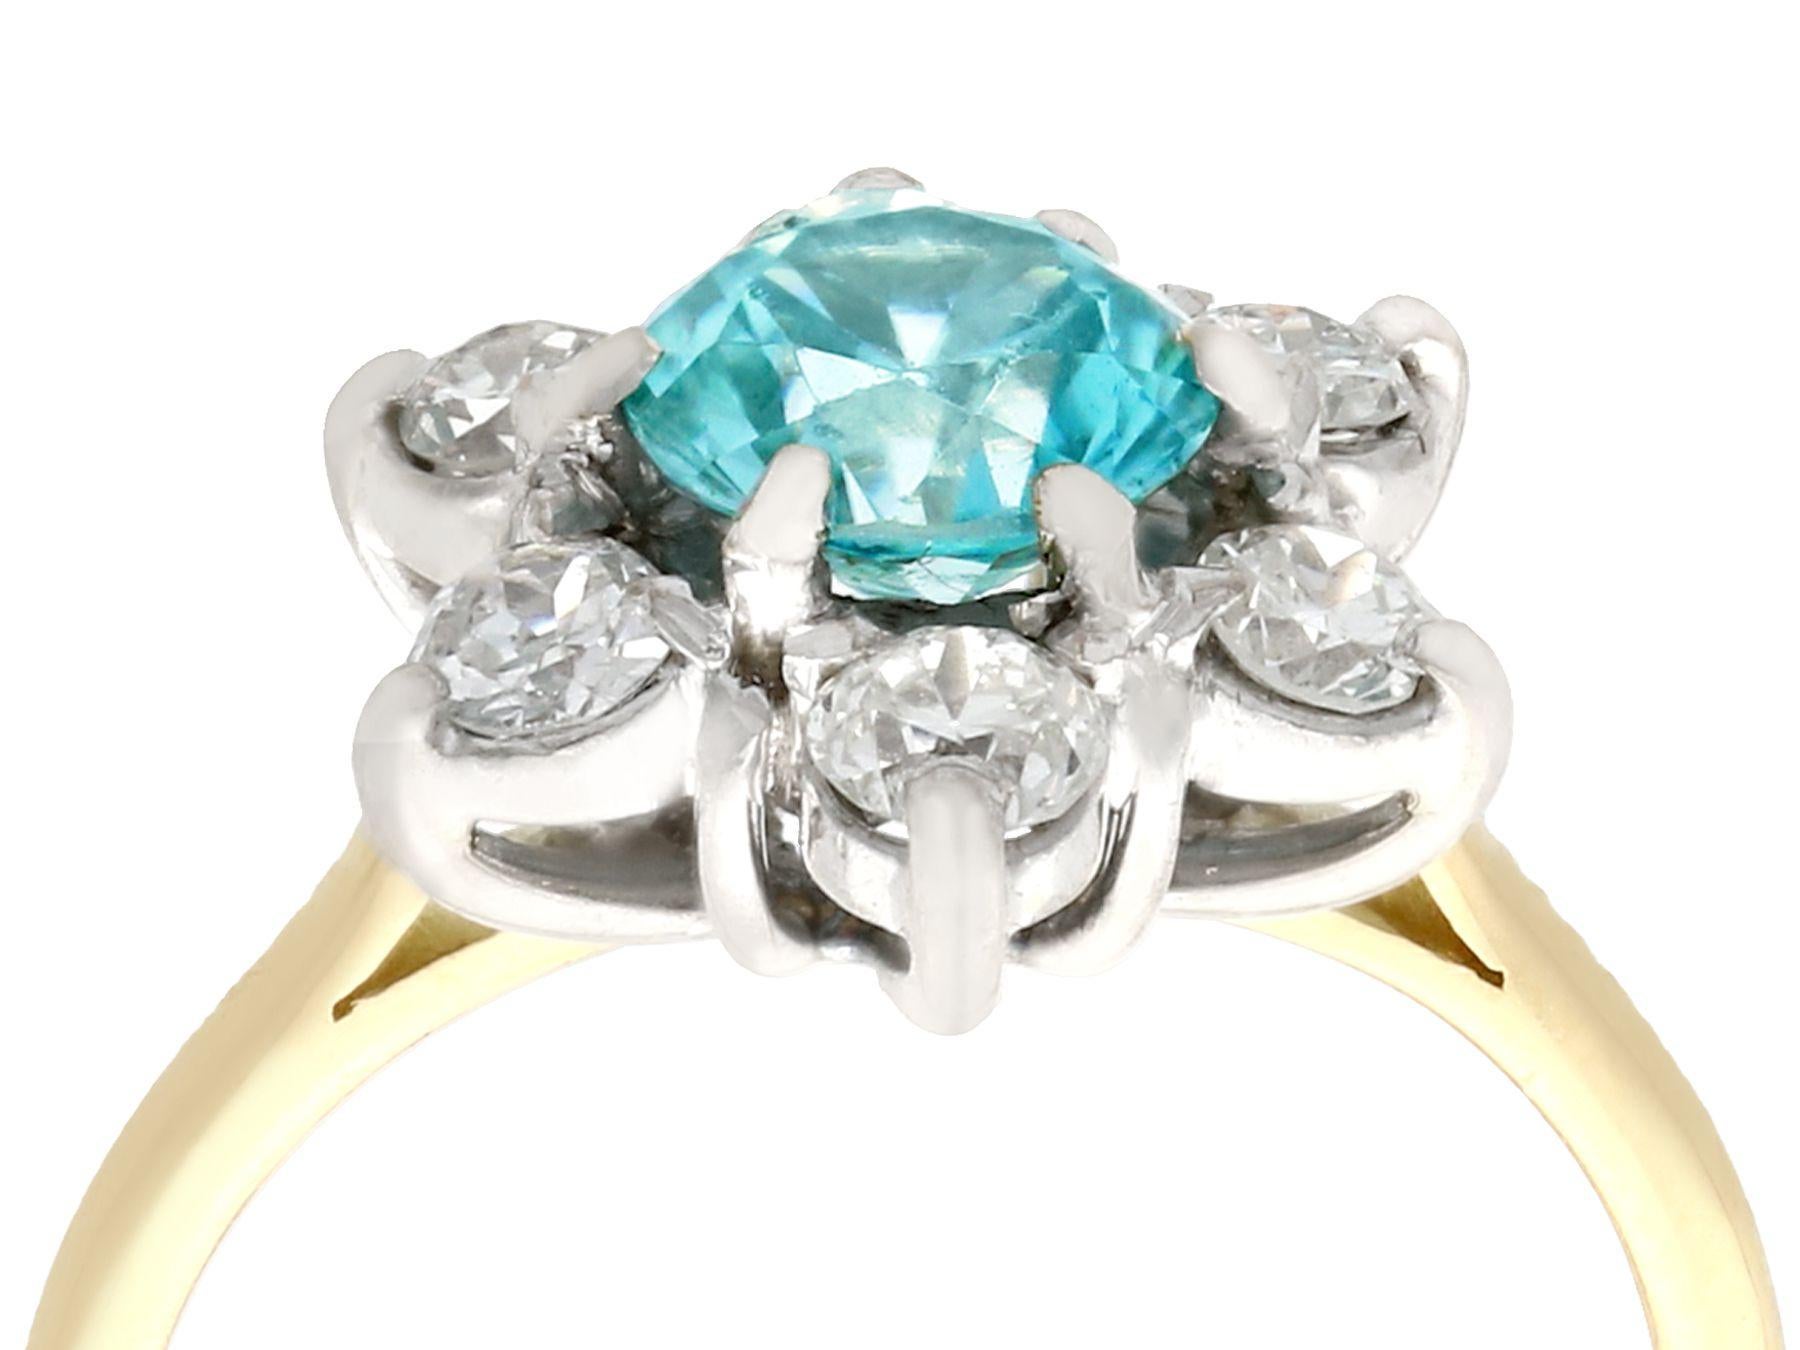 A fine and impressive antique 1.18 carat blue zircon and 0.60 carat diamond, 18 karat yellow gold cocktail ring; part of our diverse gemstone ring and estate jewelry collections.

This fine antique zircon dress ring has been crafted in 18k yellow